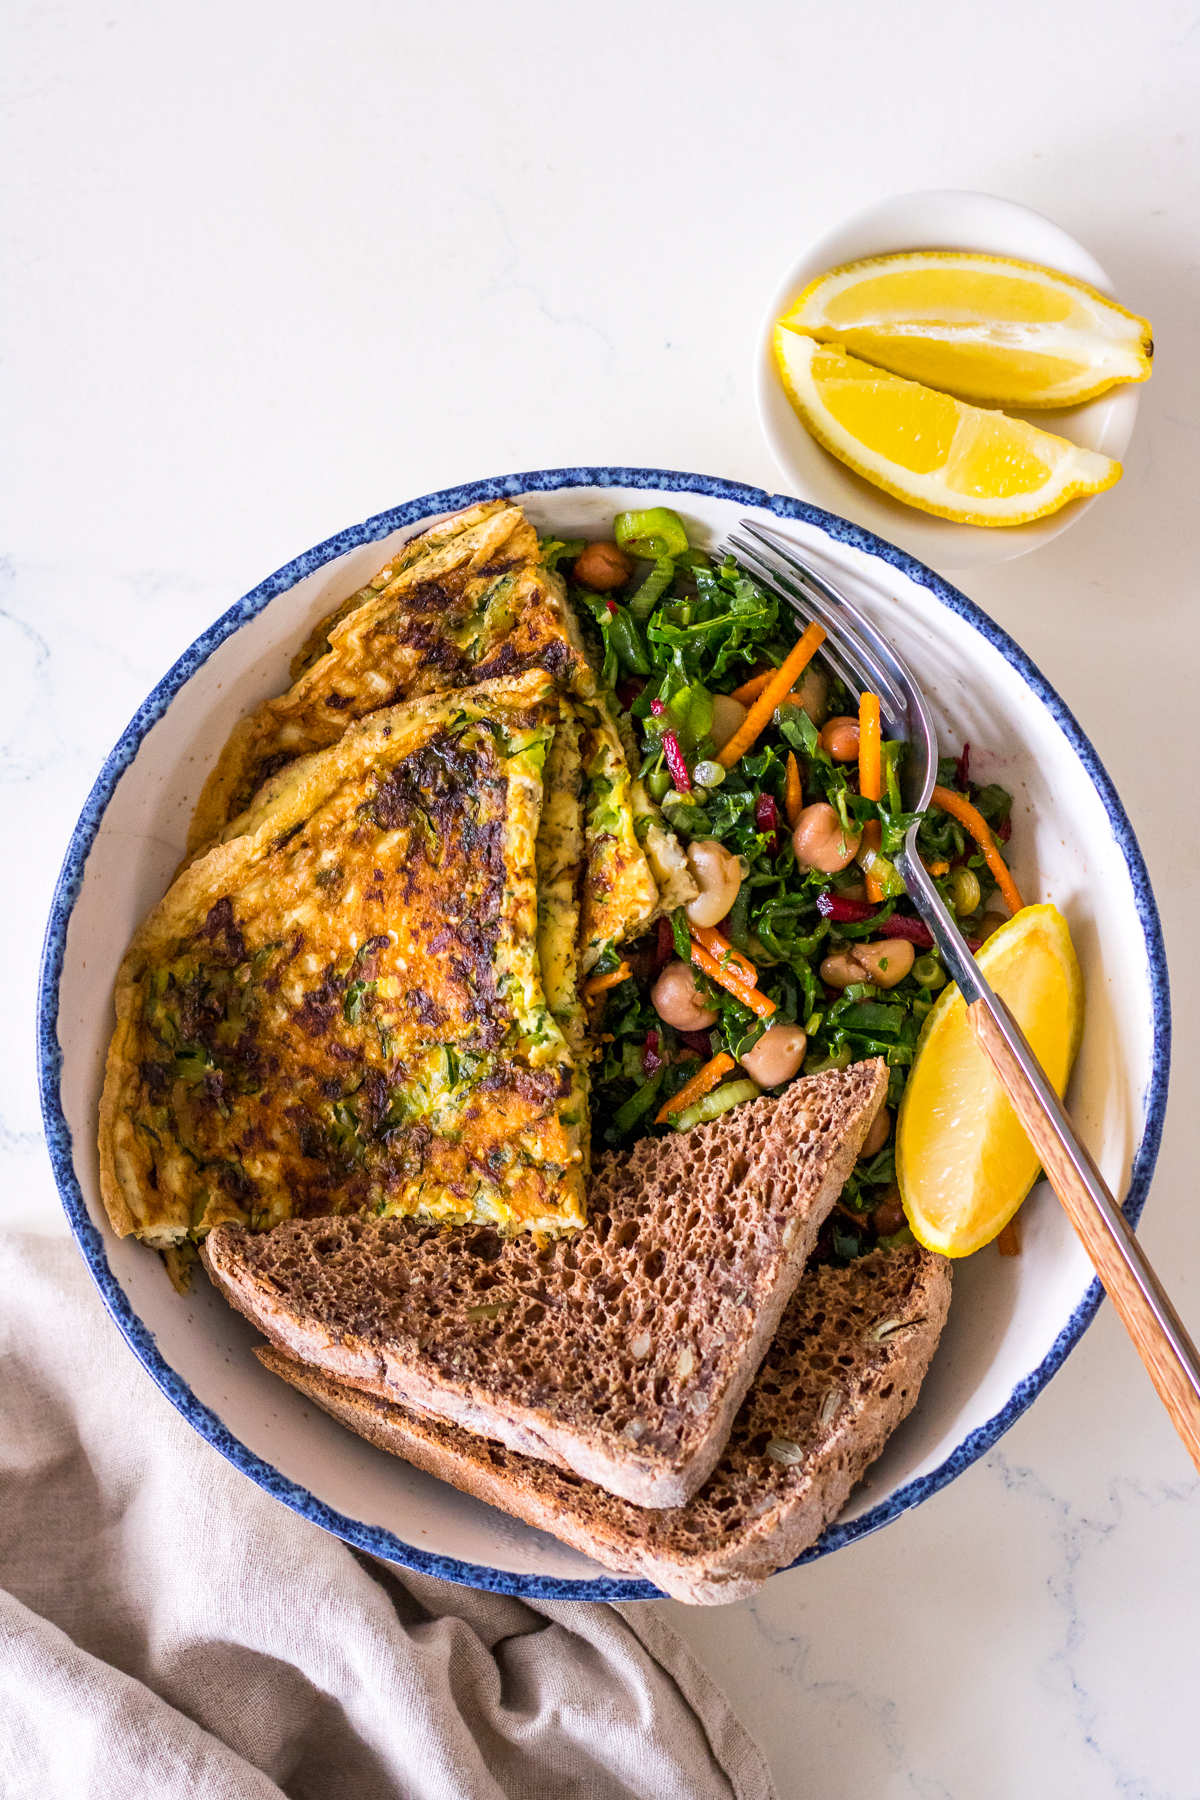 Shallow bowl with zucchini omelette, seeded toast and kale salad, lemon wedge